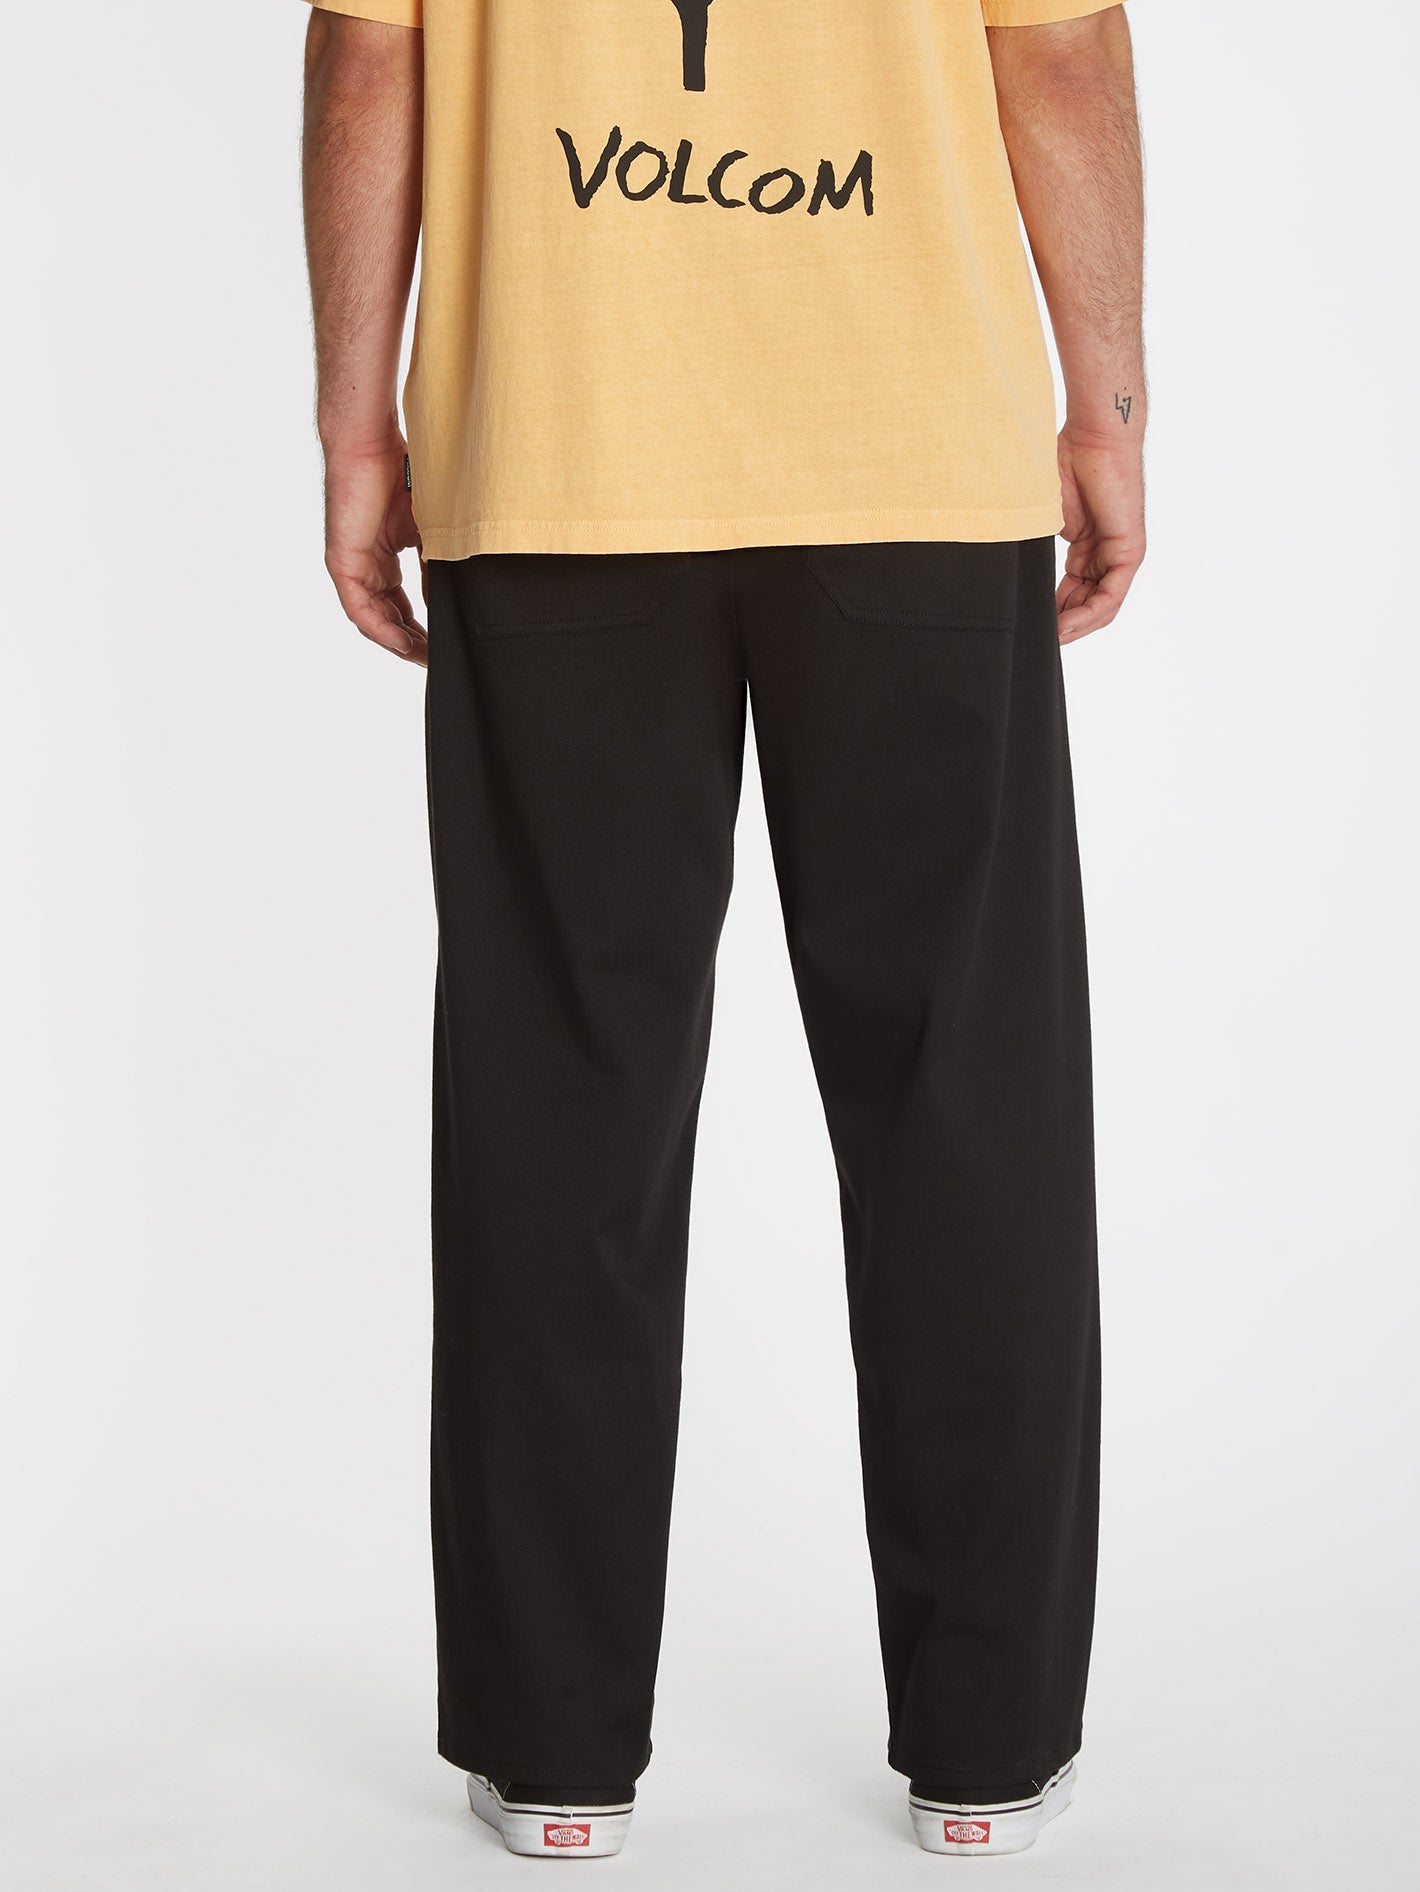 Buy Ellroy Ginger Cord Trousers for 5995  Free Returns